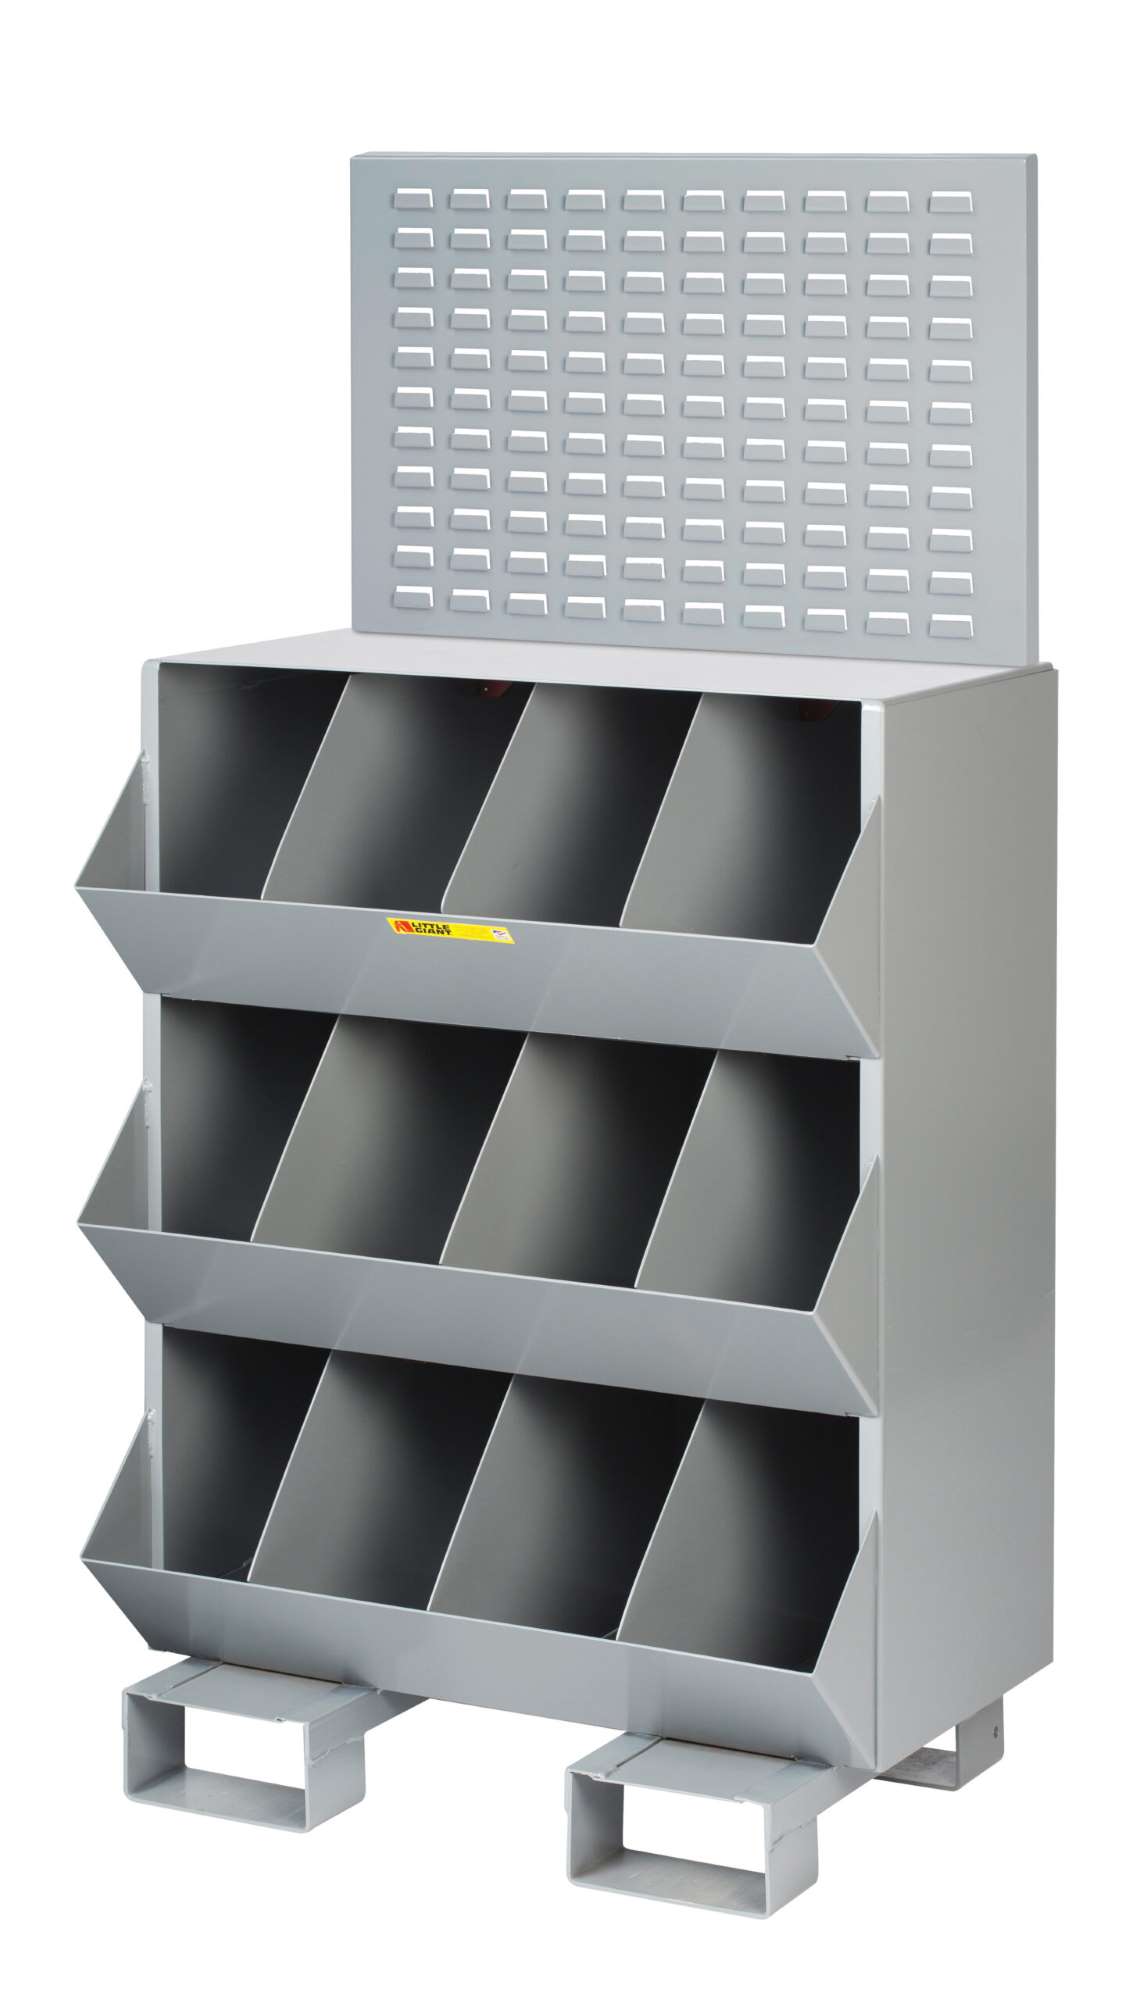 Little Giant storage bins with Louvered Panel, small parts storage bins, Welded Steel storage bins, 12 compartment storage bins, Forkliftable, includes Louvered panels for hanging plastic bins